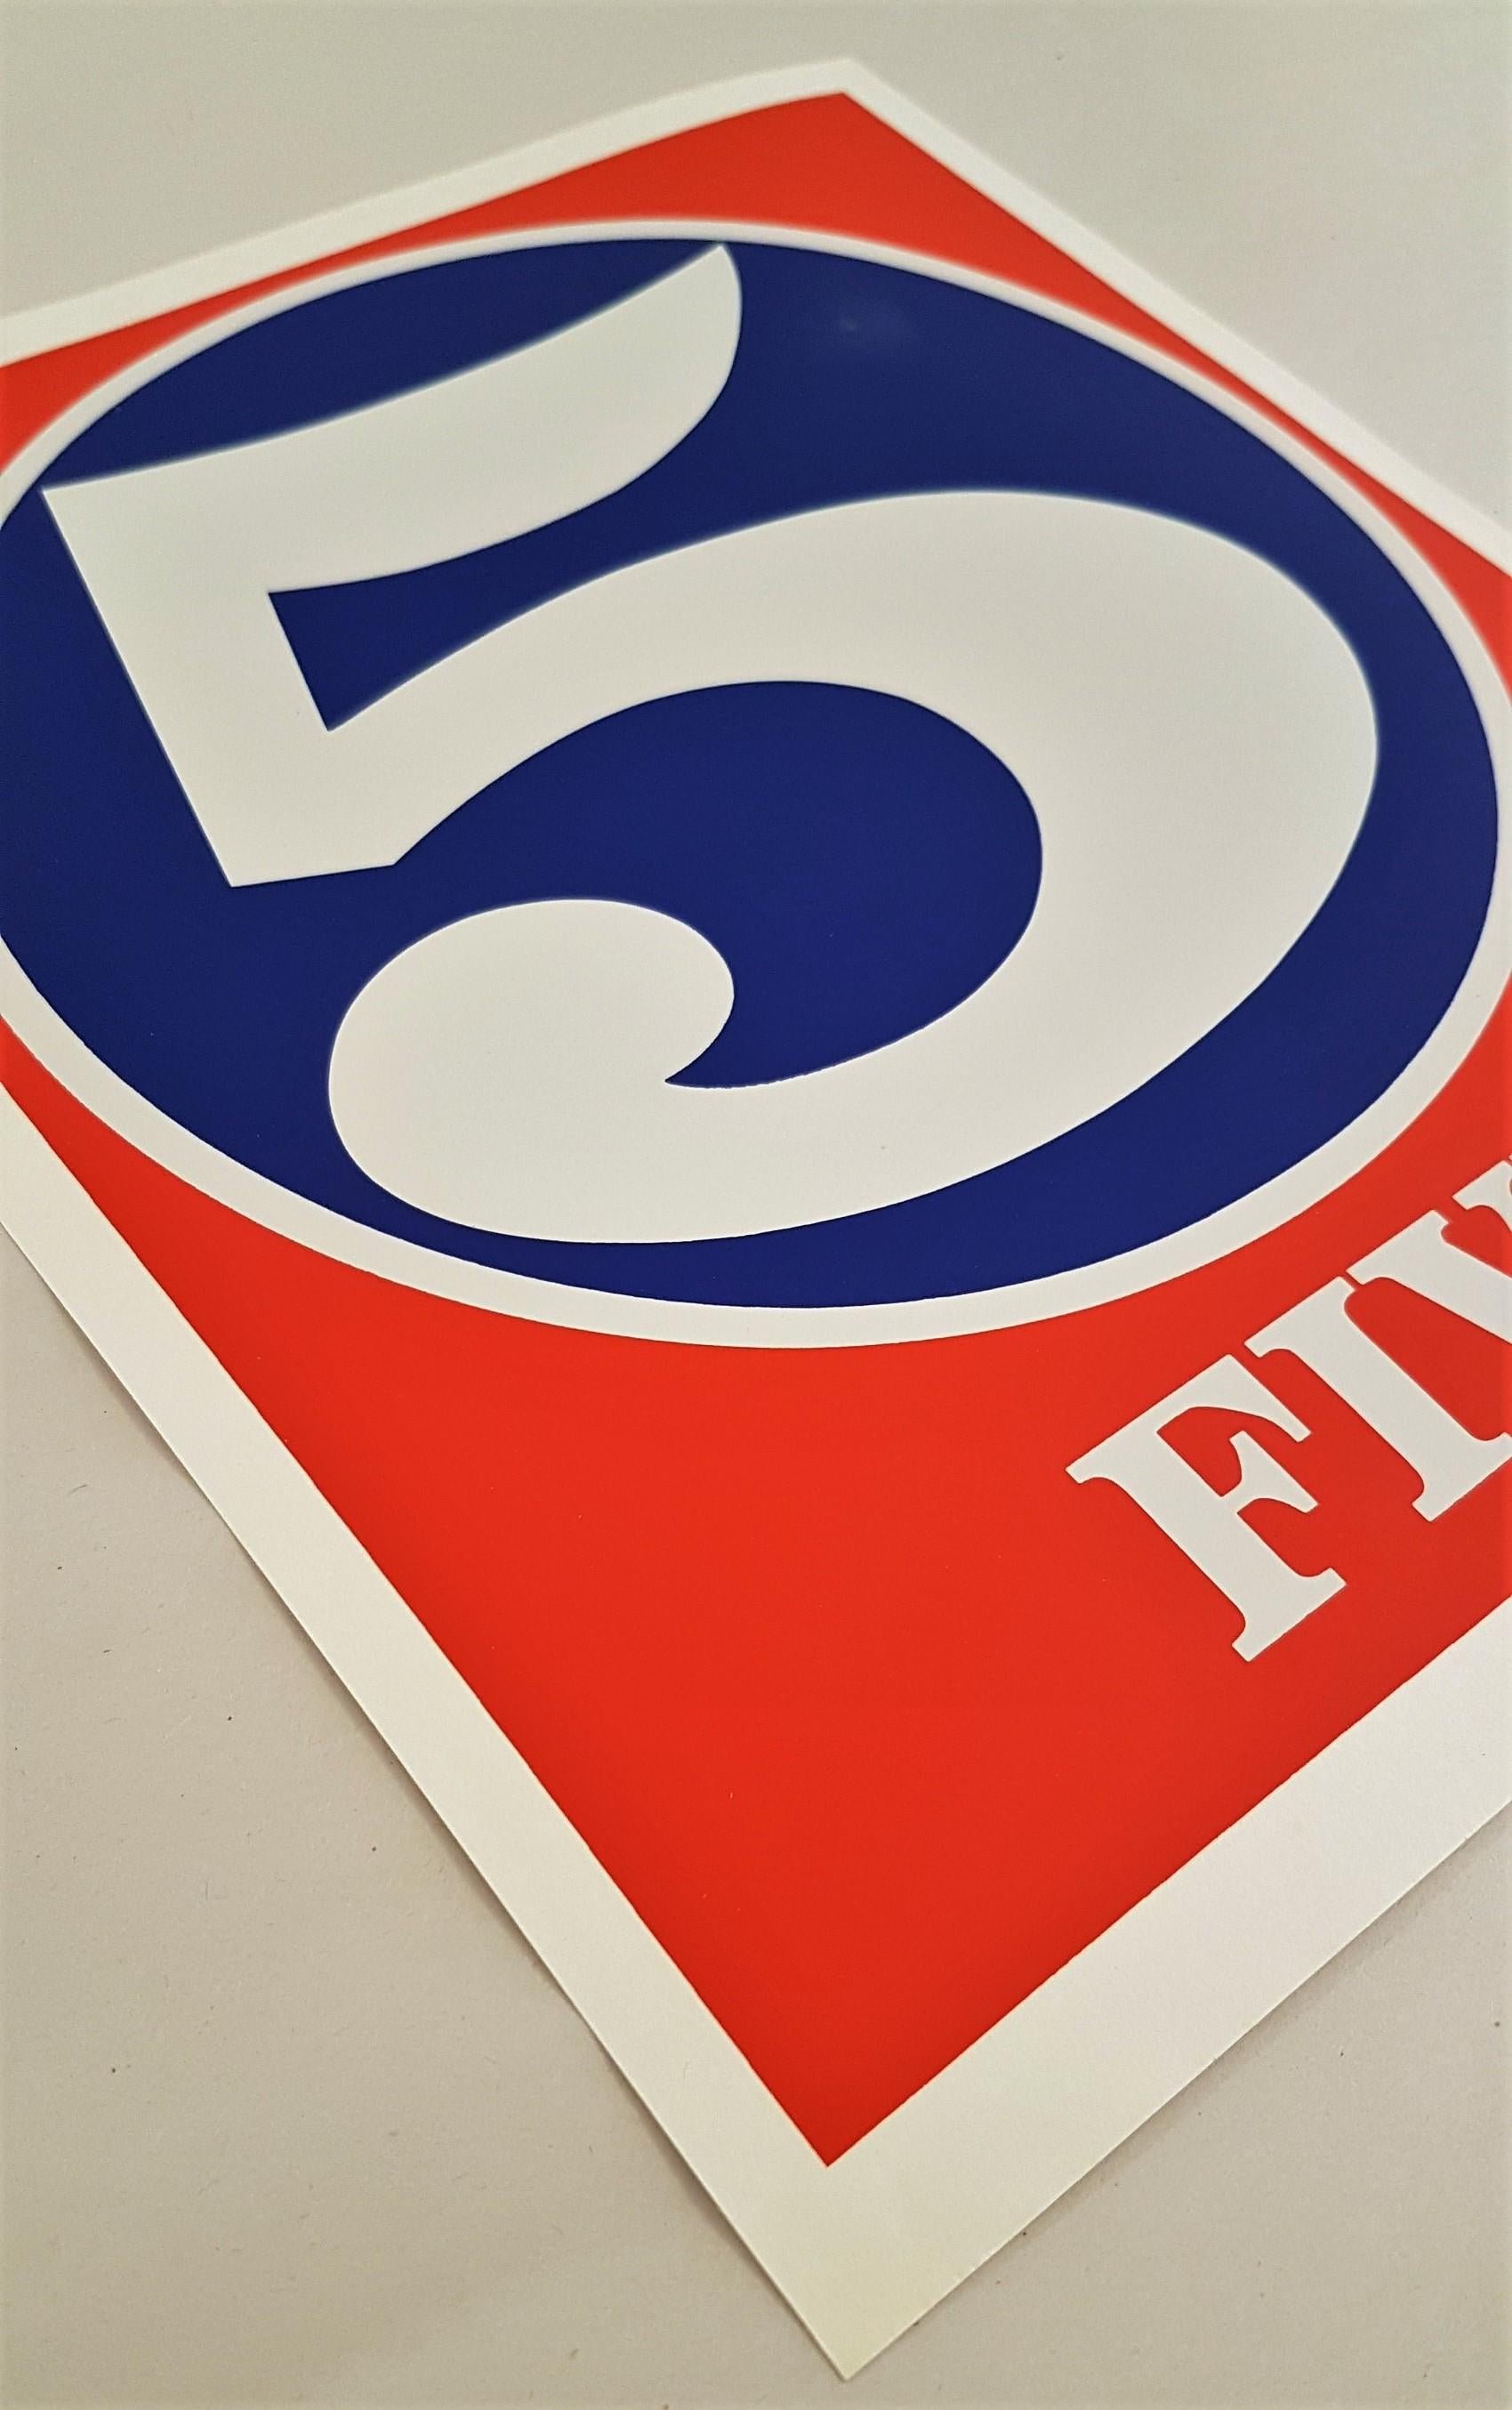 Number Suite - Five - American Modern Print by Robert Indiana